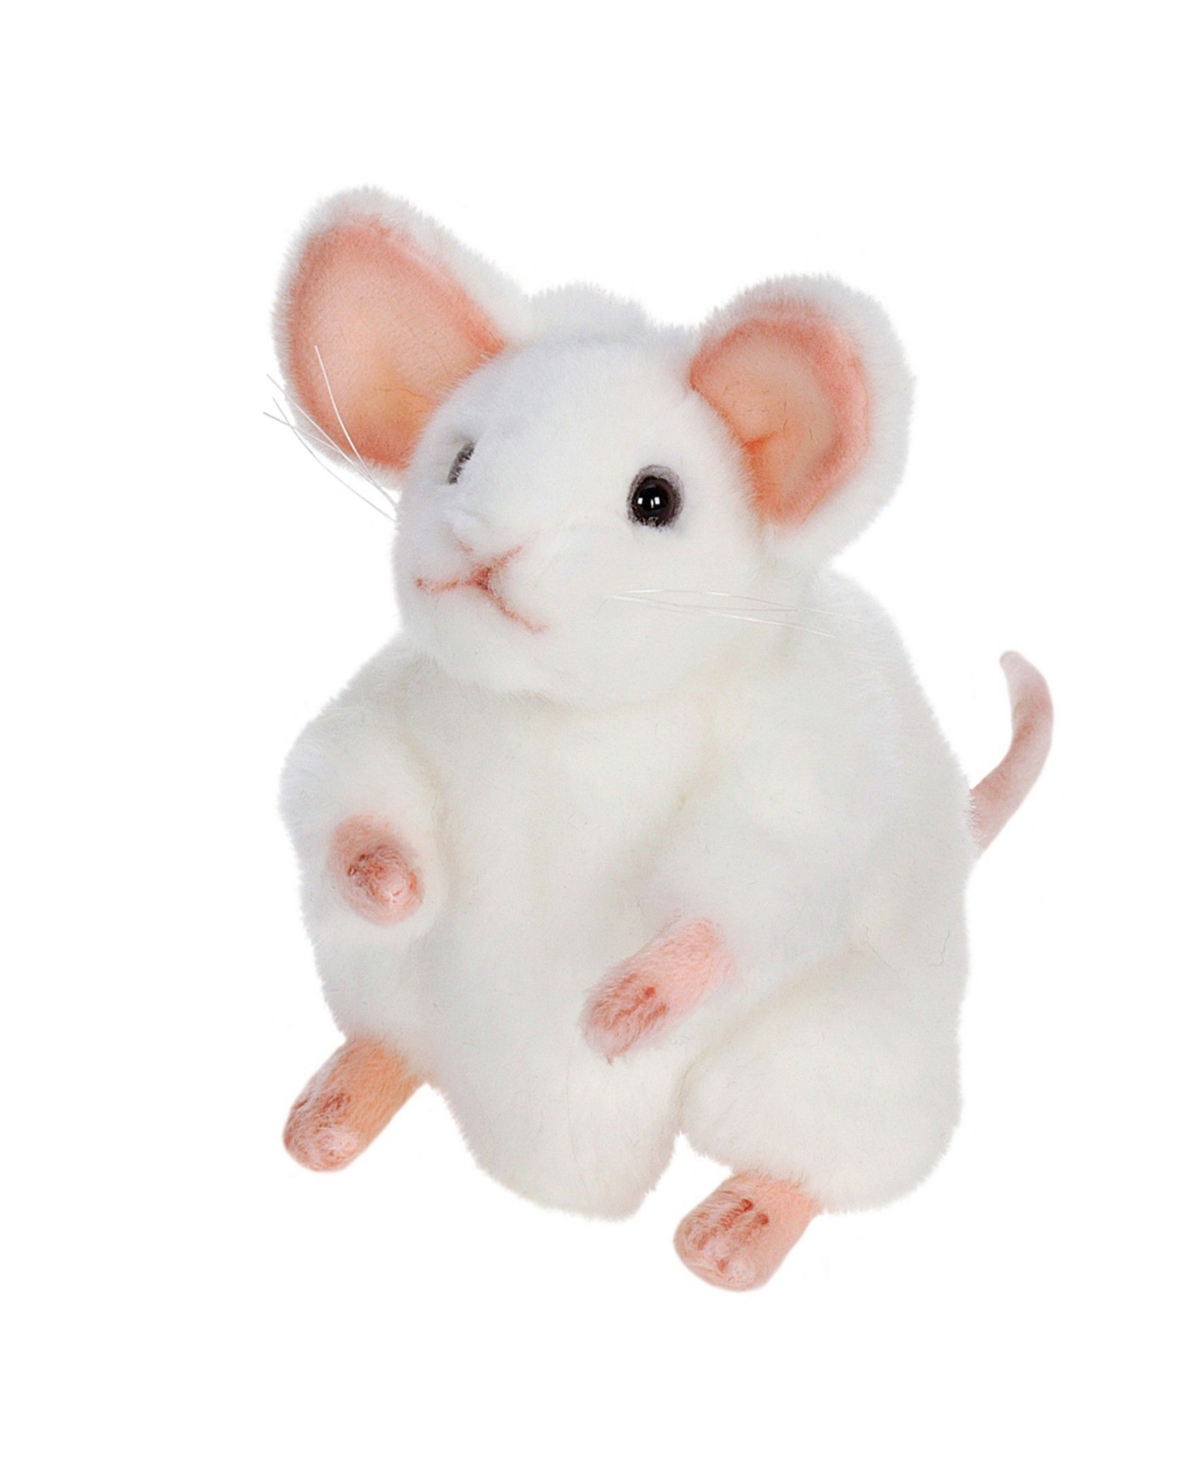 First & Main Hansa German 6" Mouse Plush Toy In White